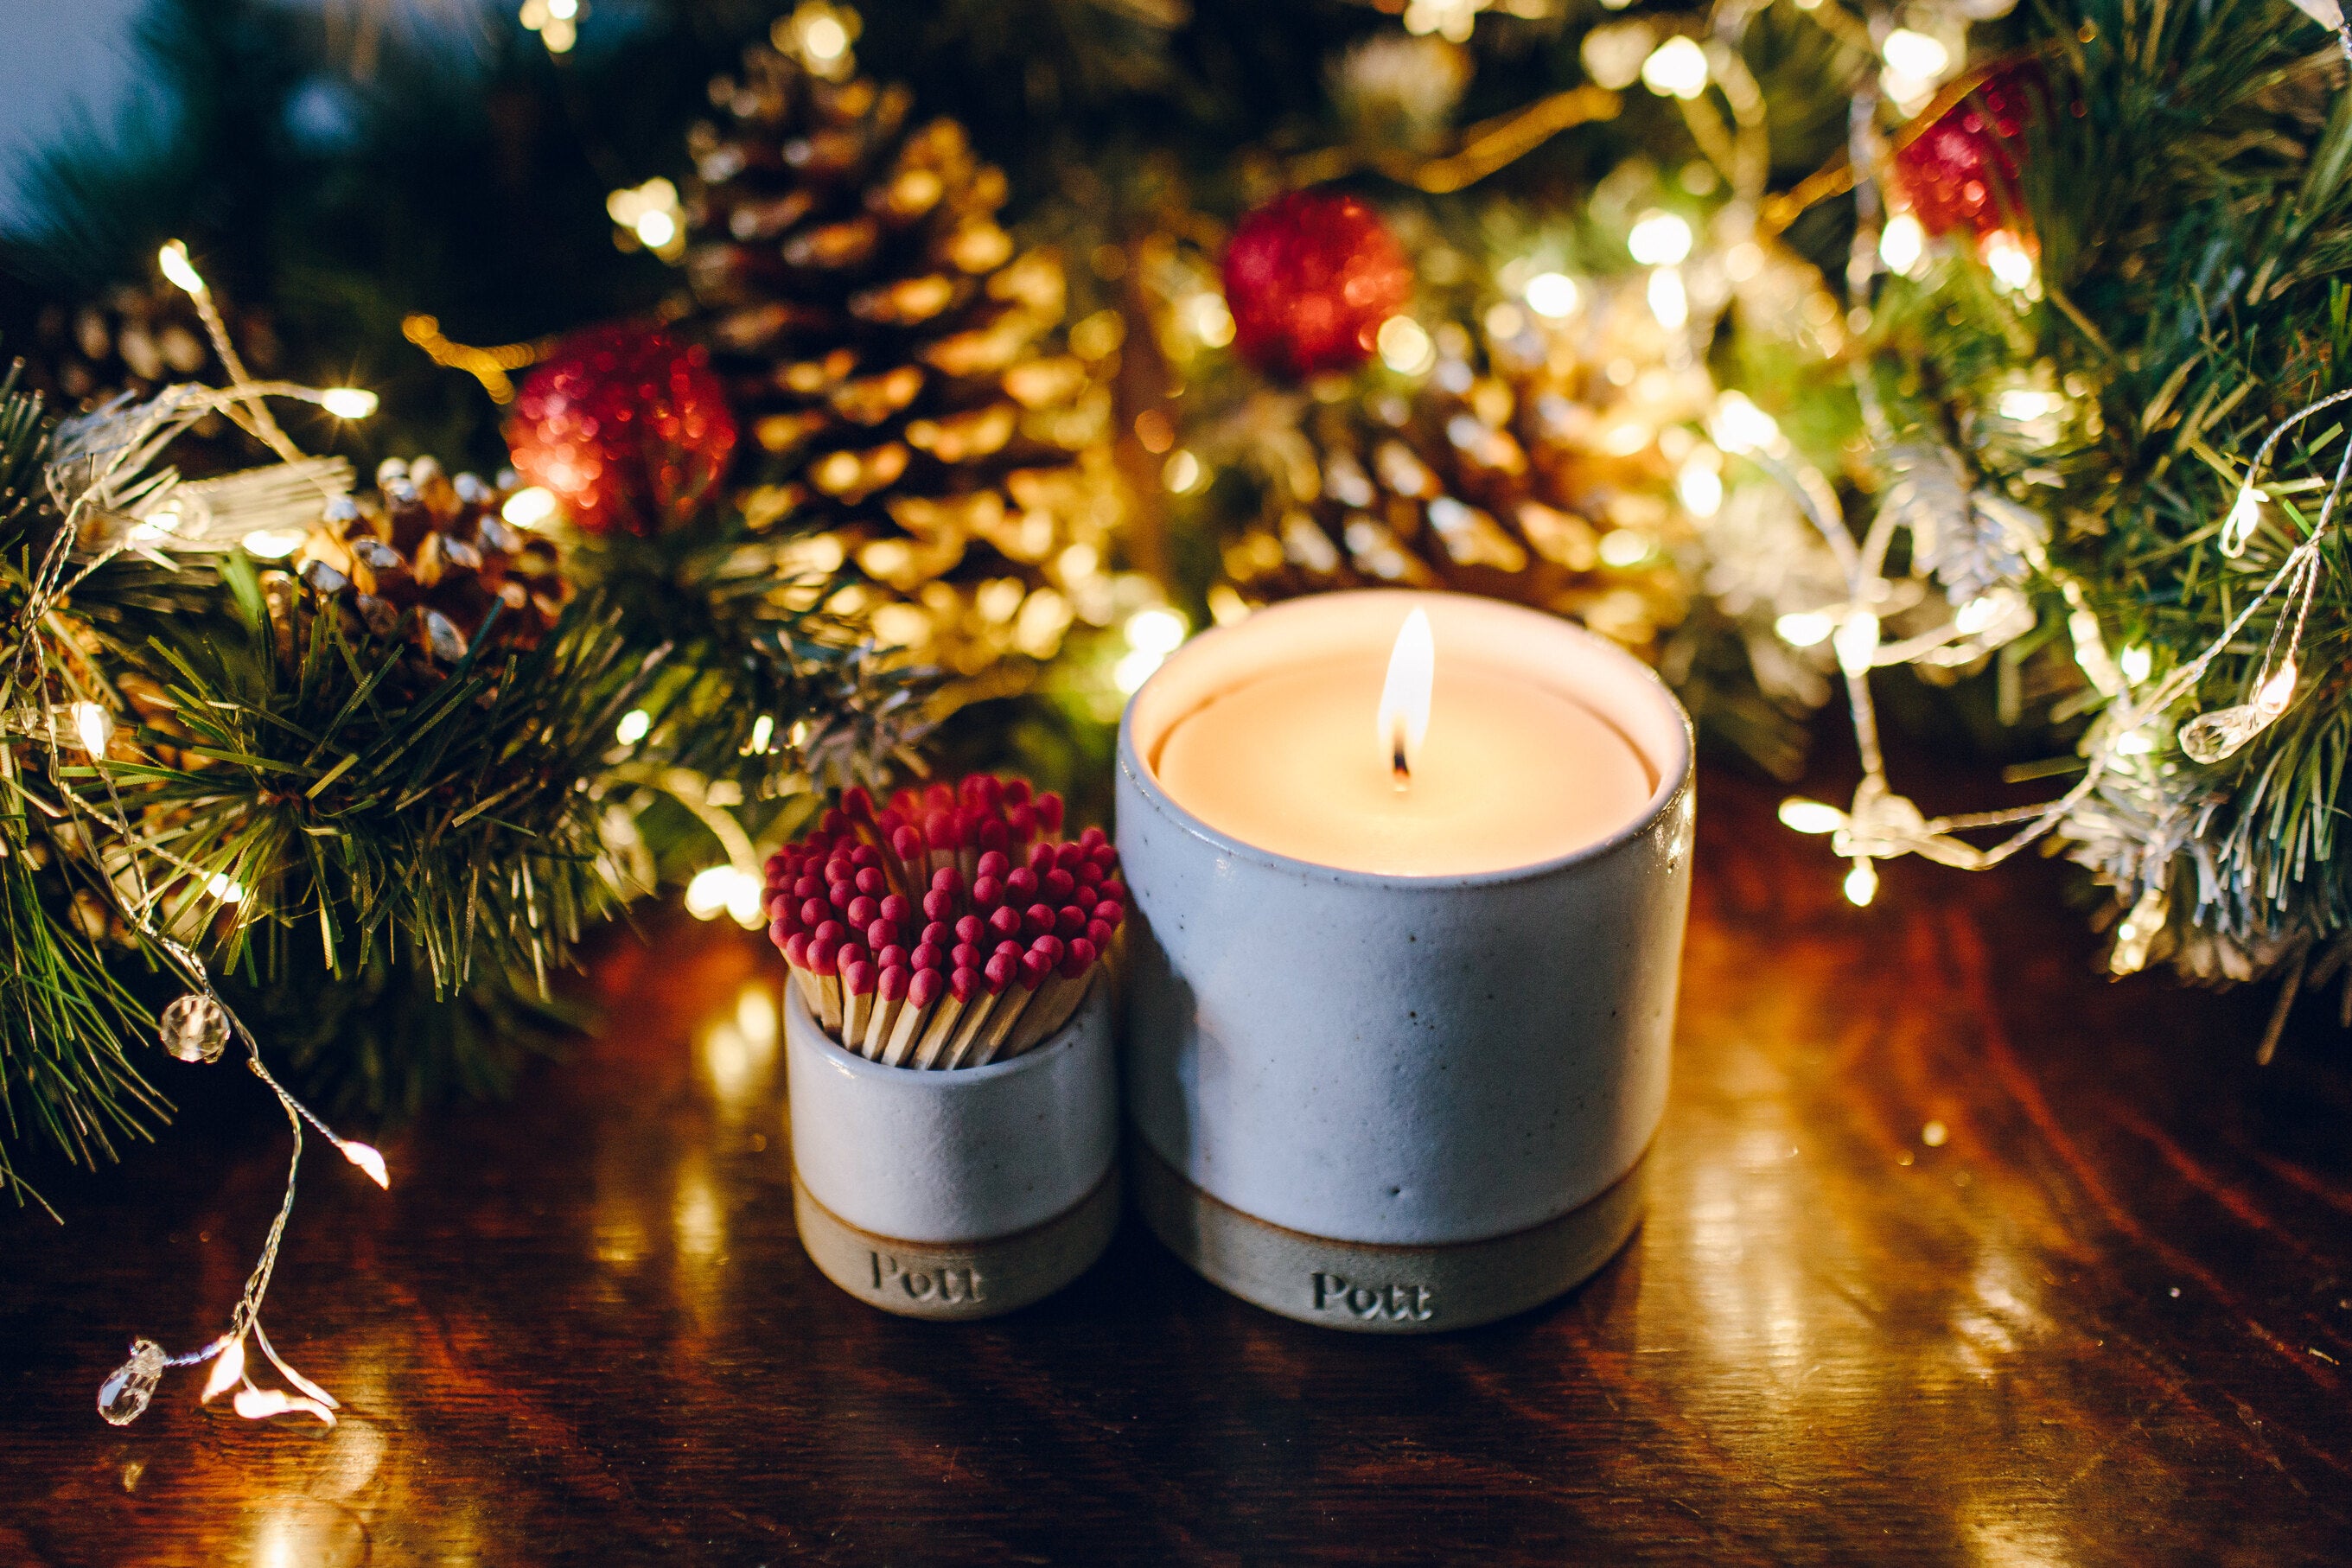 6 reasons why Pott Candles & Diffusers are great sustainable Christmas gifts